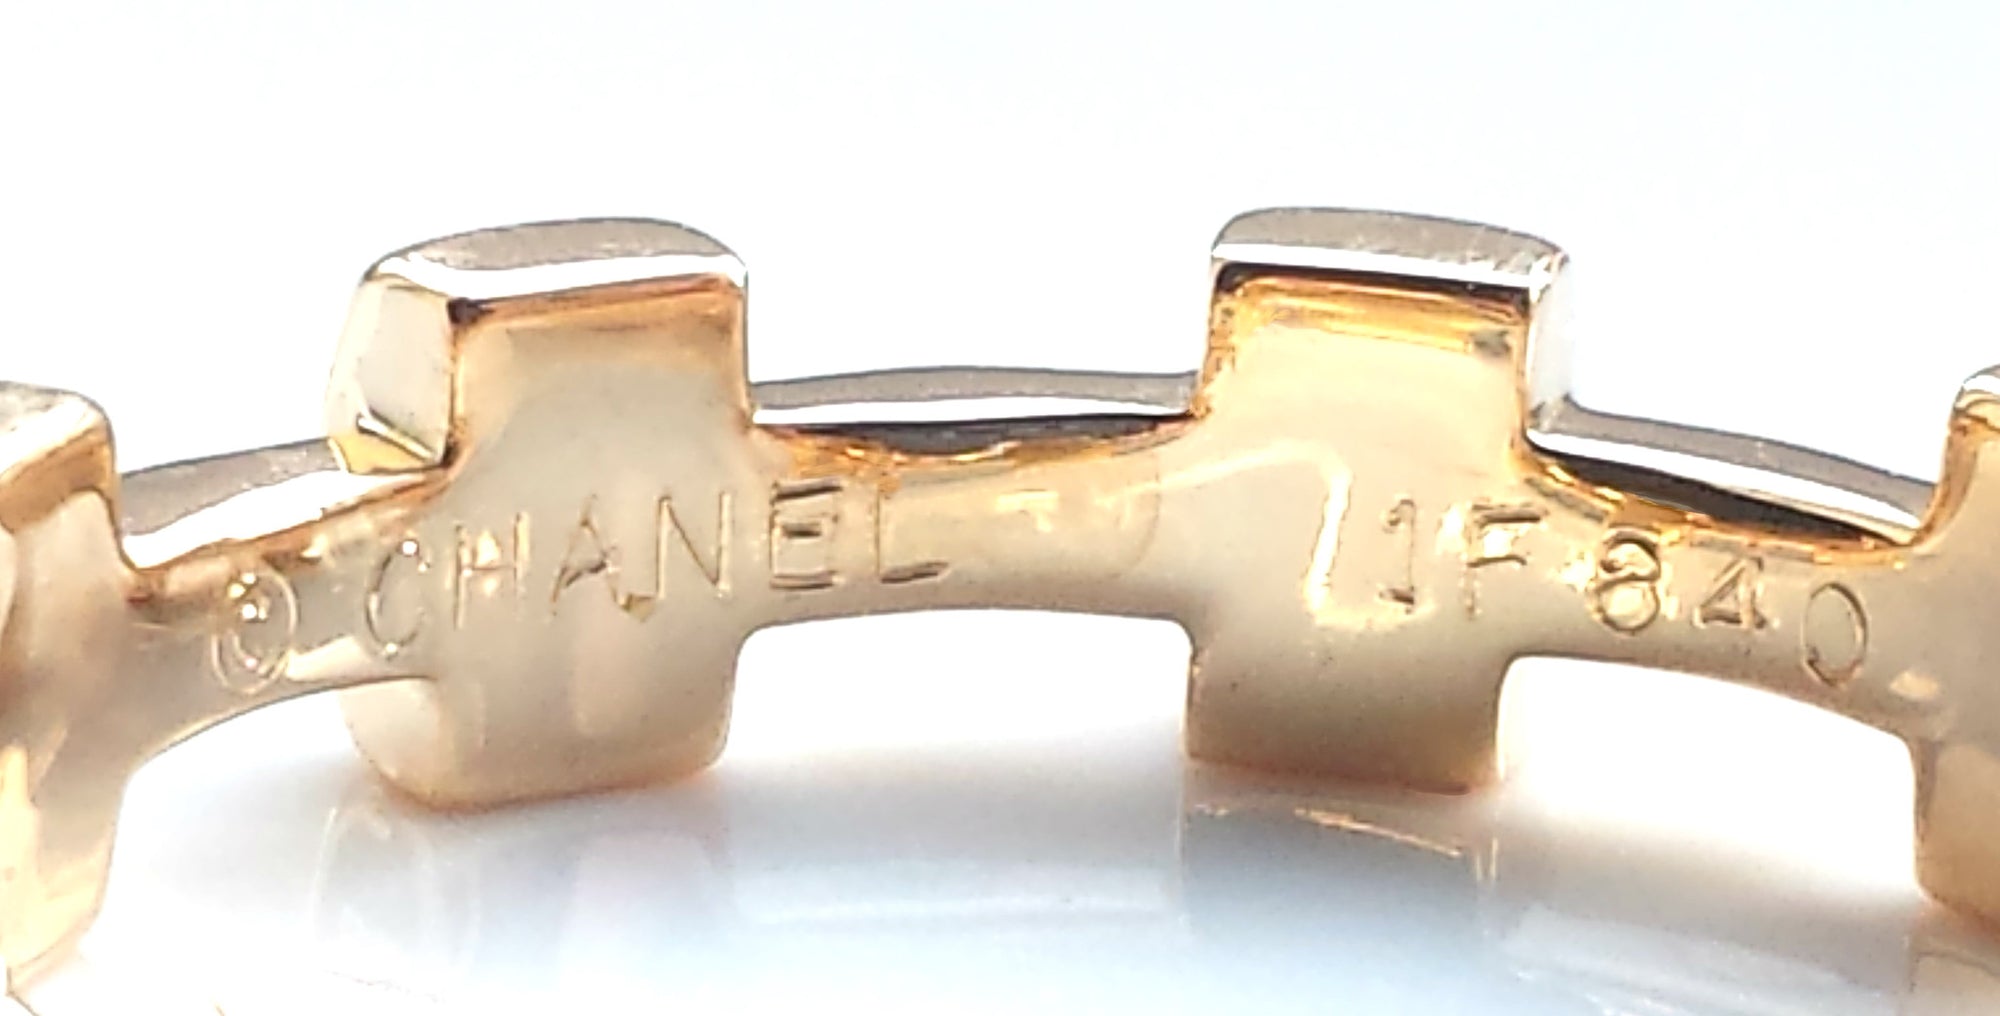 Vintage Chanel 1980s Palissade Ring in 18k Yellow Gold, Size 54 (UK N)